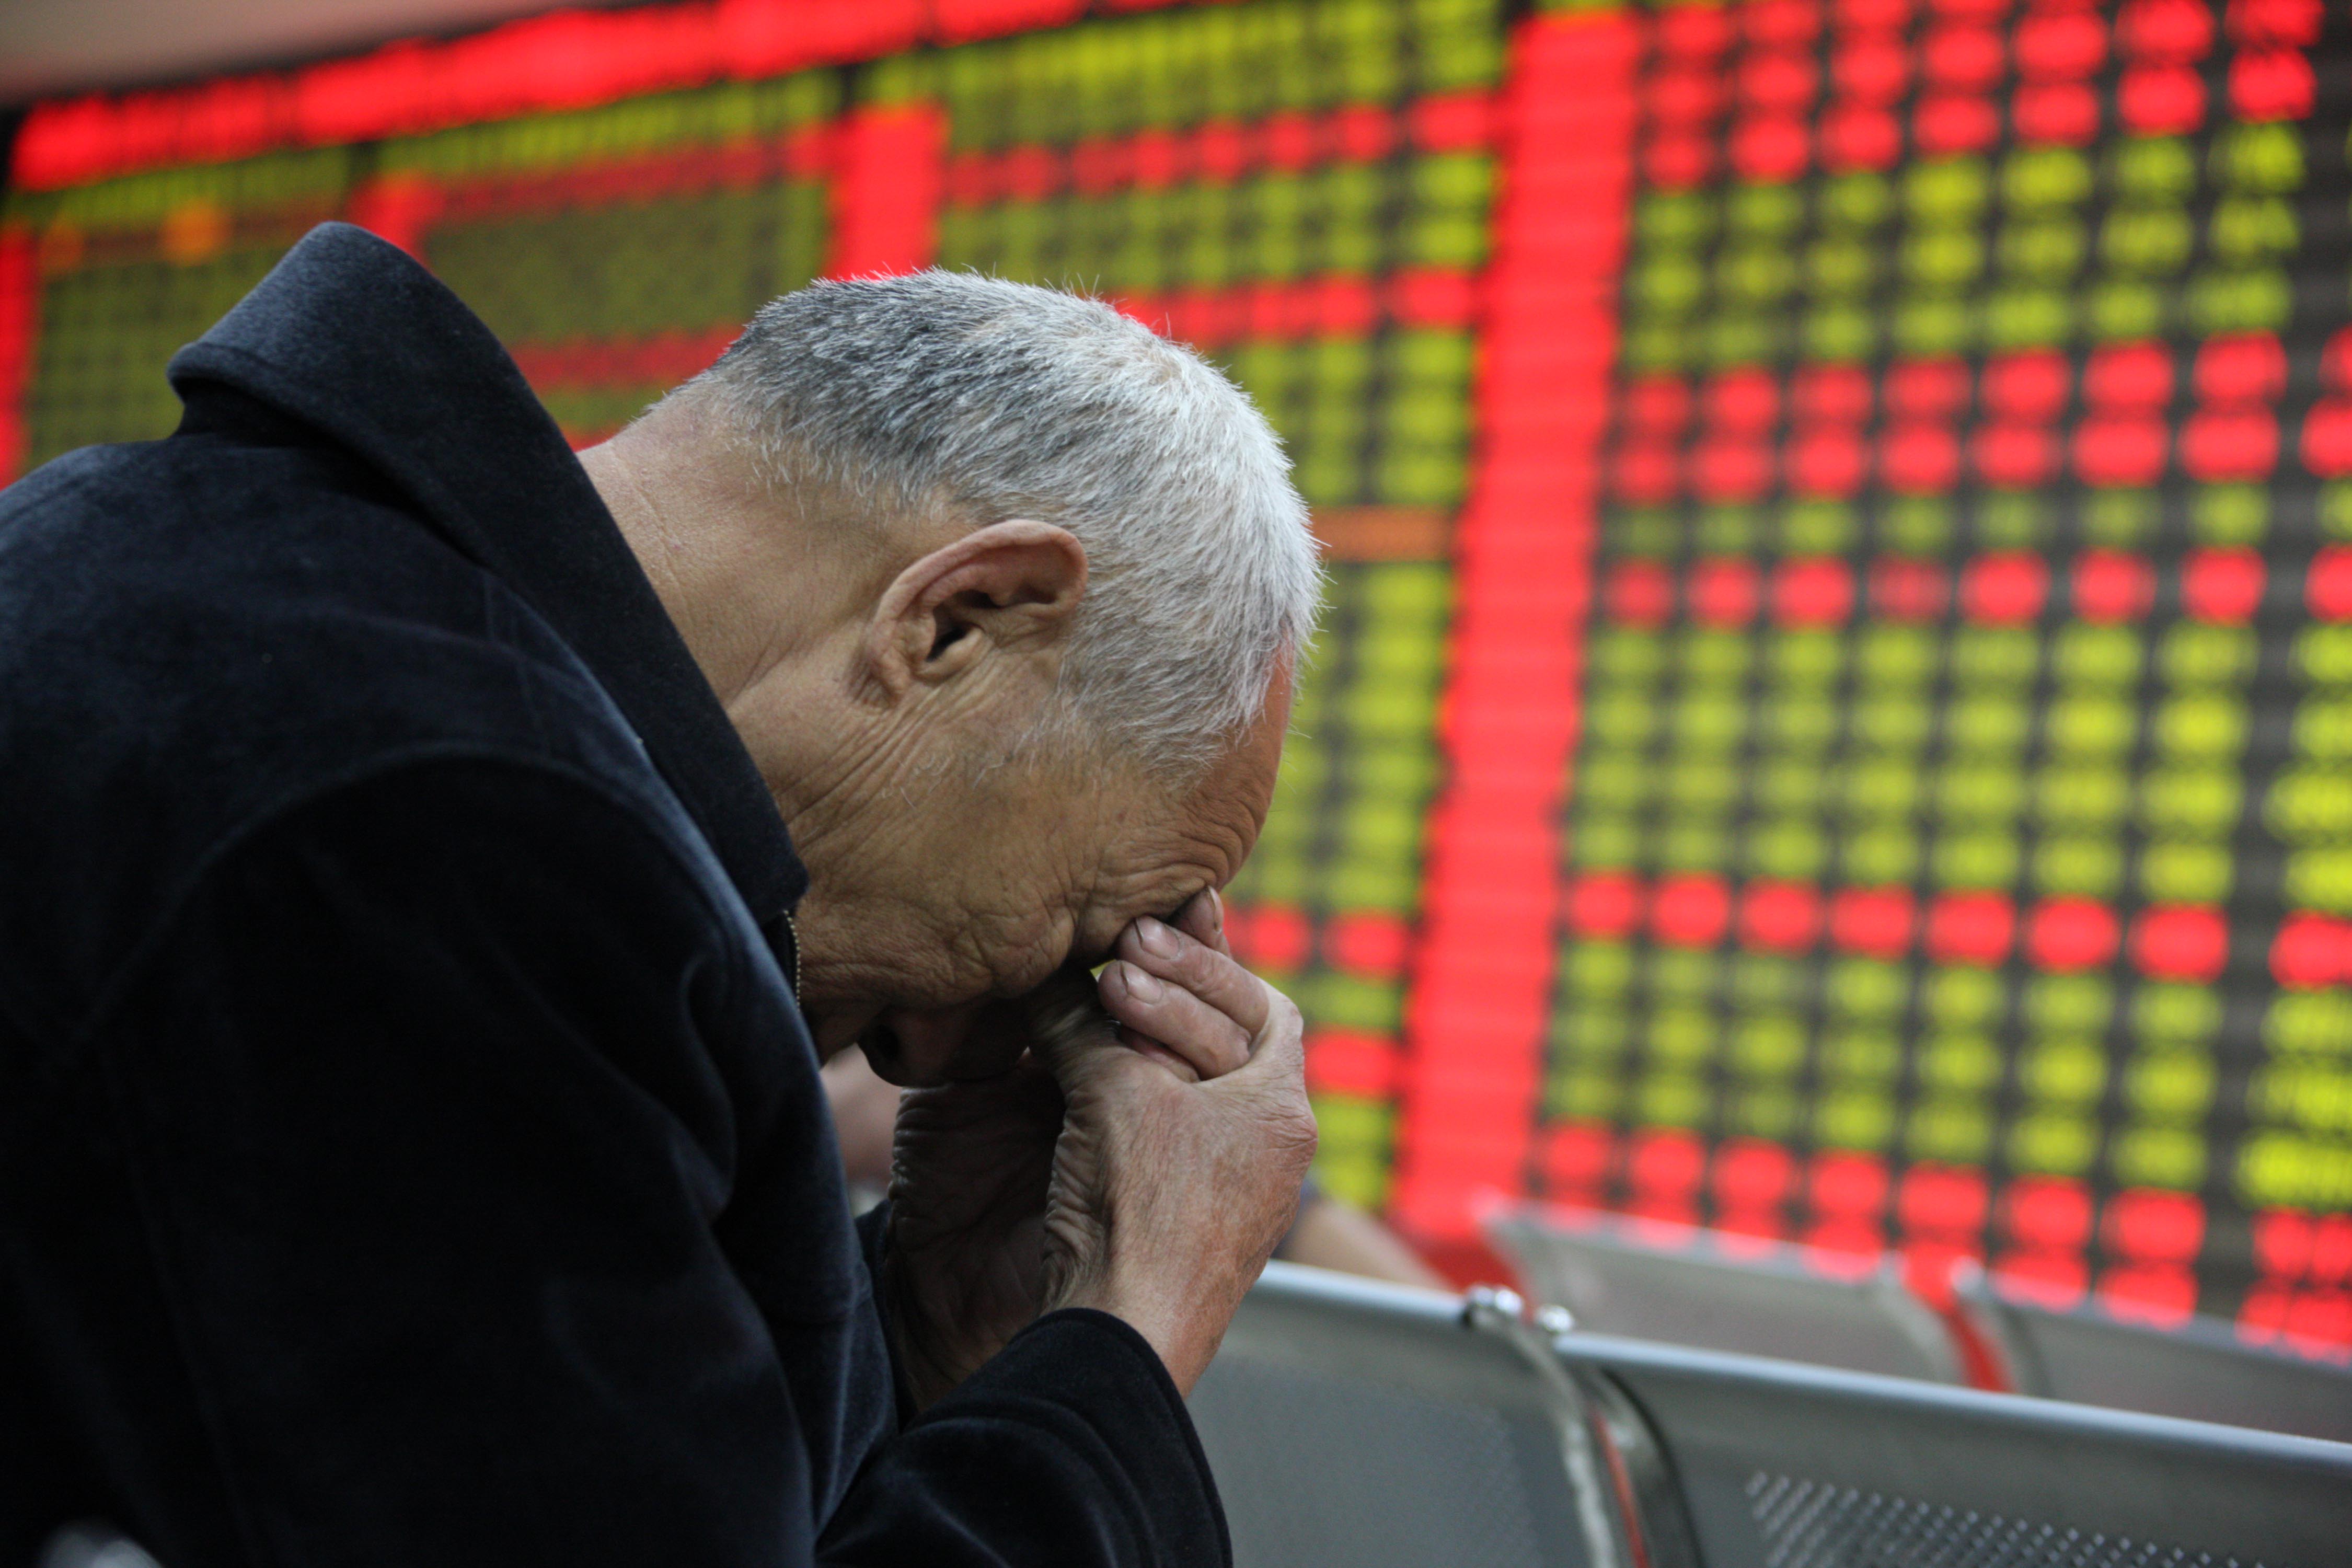 An elderly Chinese investor rubs his forehead underneath an electronic board showing stock prices. Analysts fret that small cap stocks in Hong Kong and on the mainland are in bubble territory. Photo: Xinhua